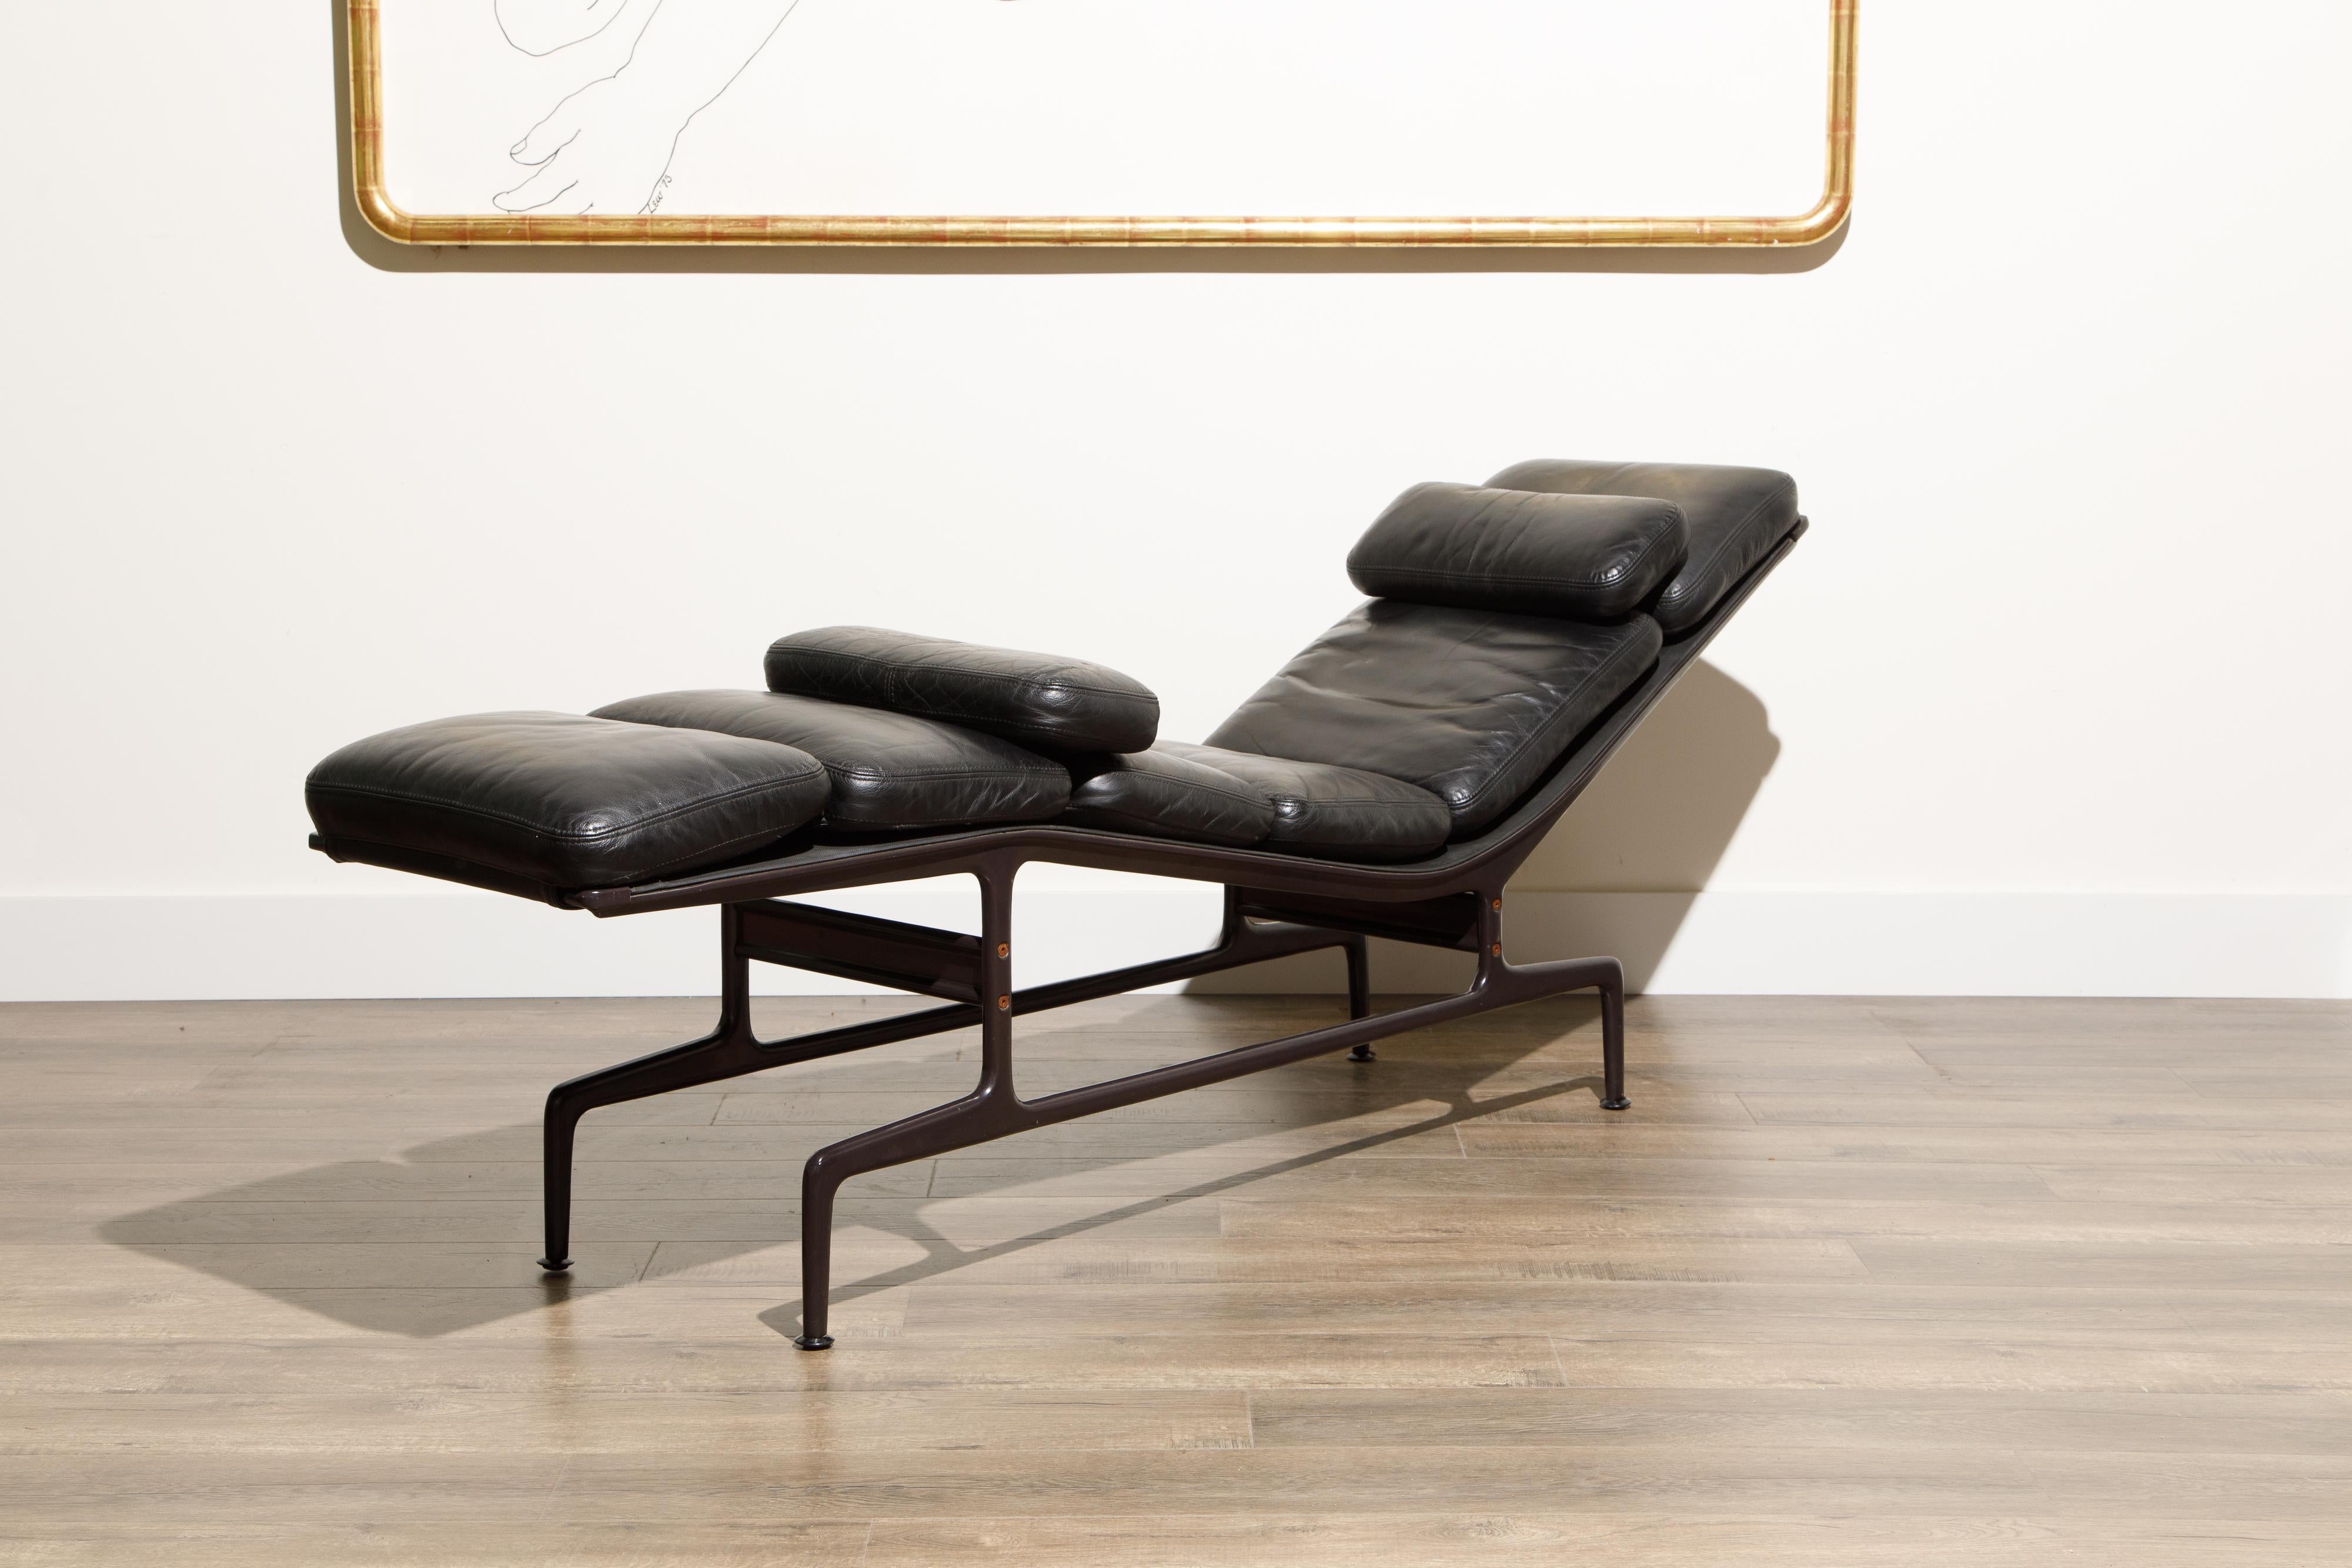 Late 20th Century Billy Wilder Chaise Lounge by Ray & Charles Eames for Herman Miller